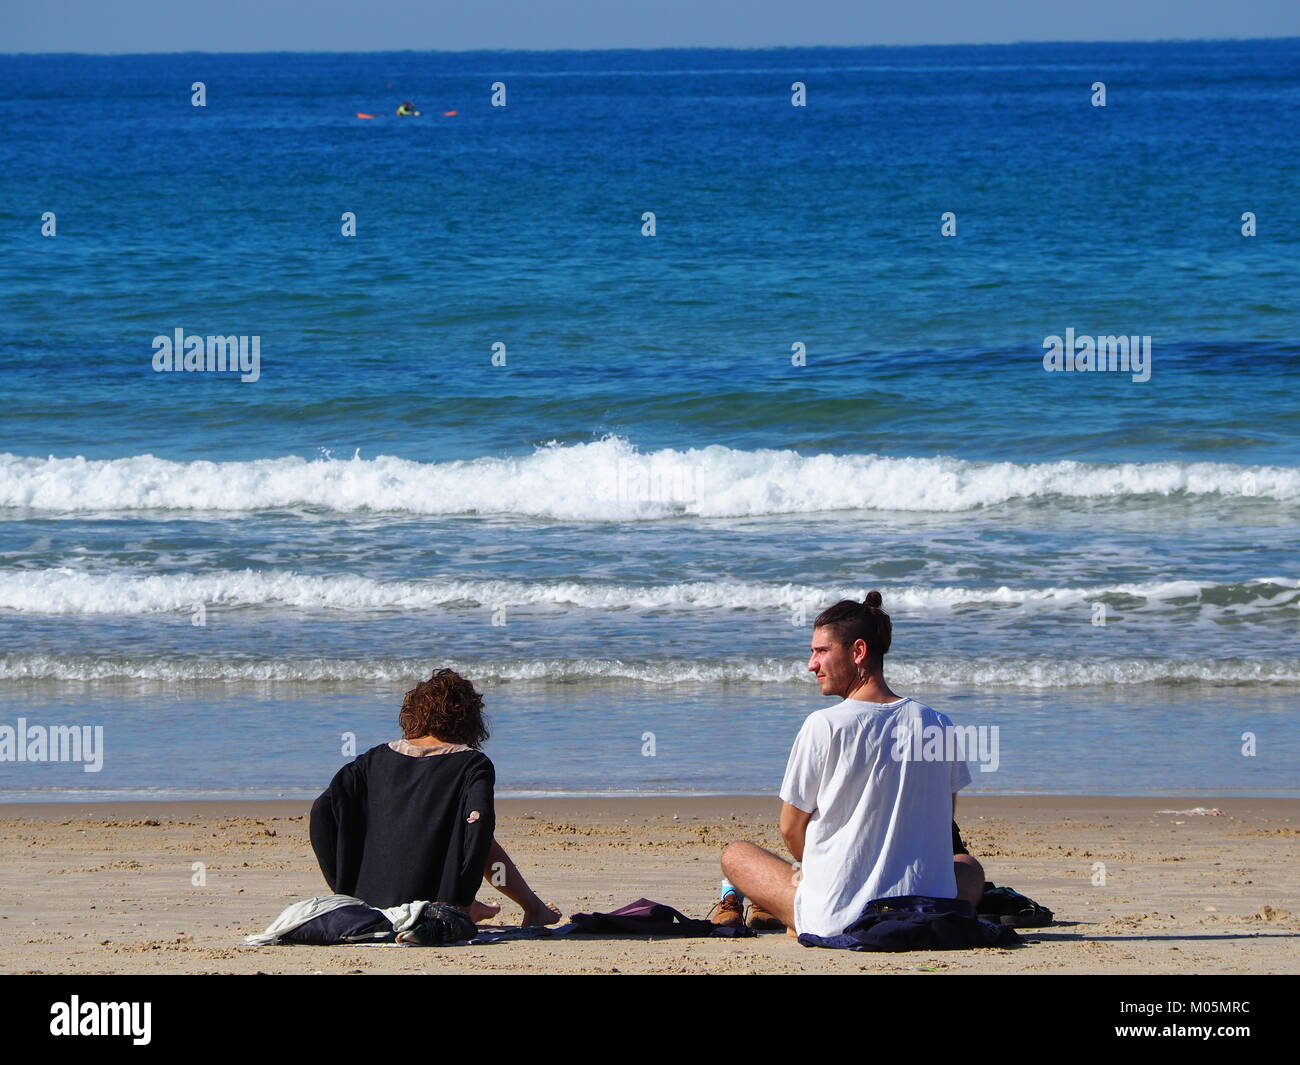 two Friends sitting on the beach sand on a perfect clear day and having a conversation with each other Stock Photo